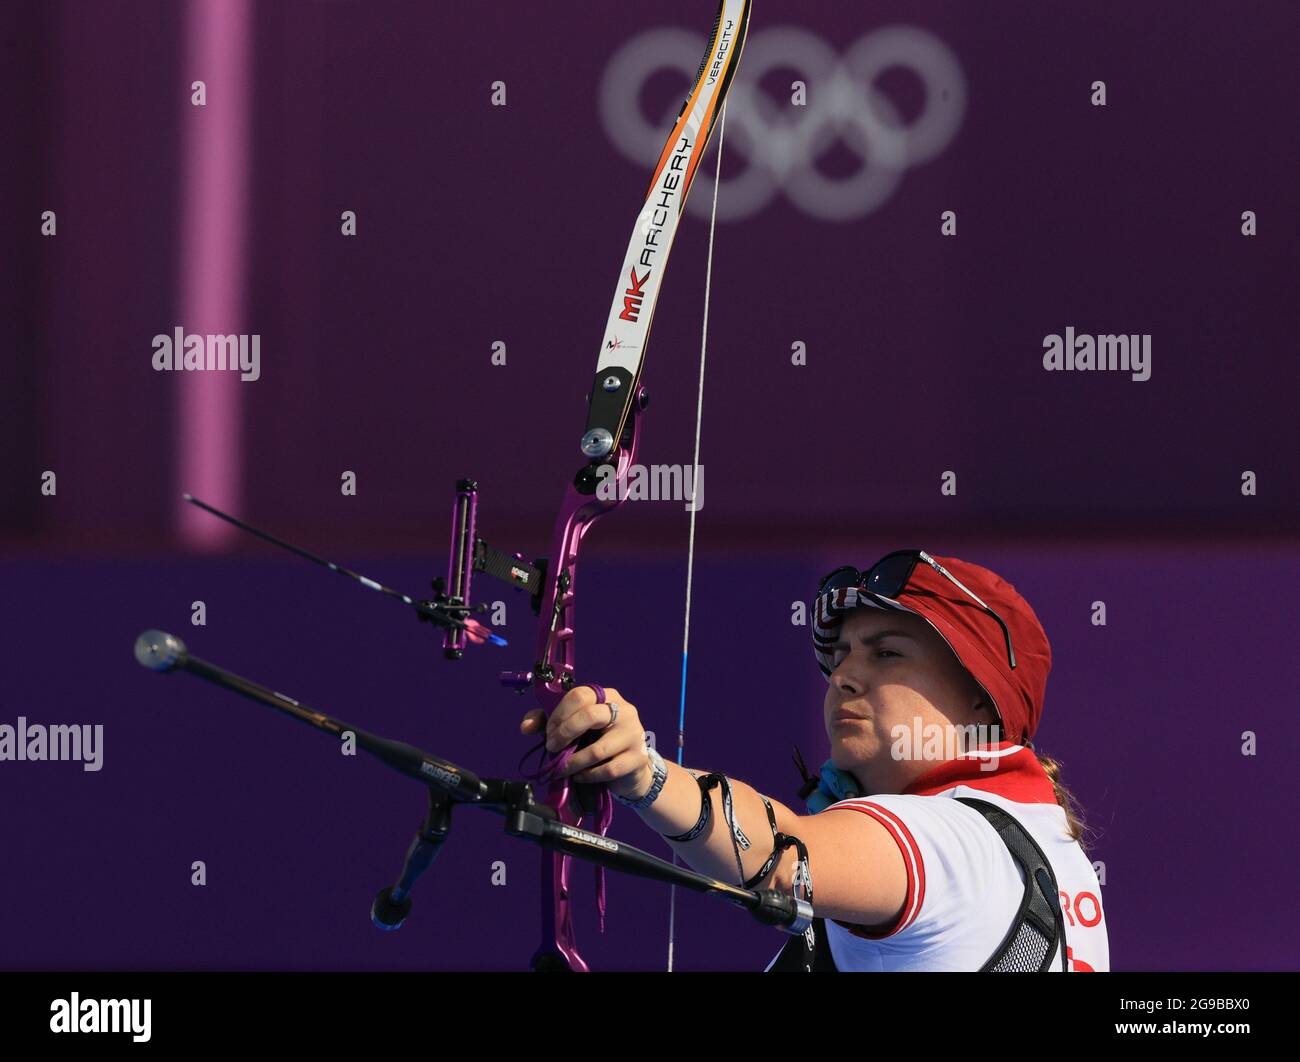 Tokyo Japan 25th July 21 Ksenia Perova Of The Roc Team Competes In The Women S Archery Team Qualification Event During The Summer Olympic Games At Yumenoshima Final Field Credit Sergei Bobylev Tass Alamy